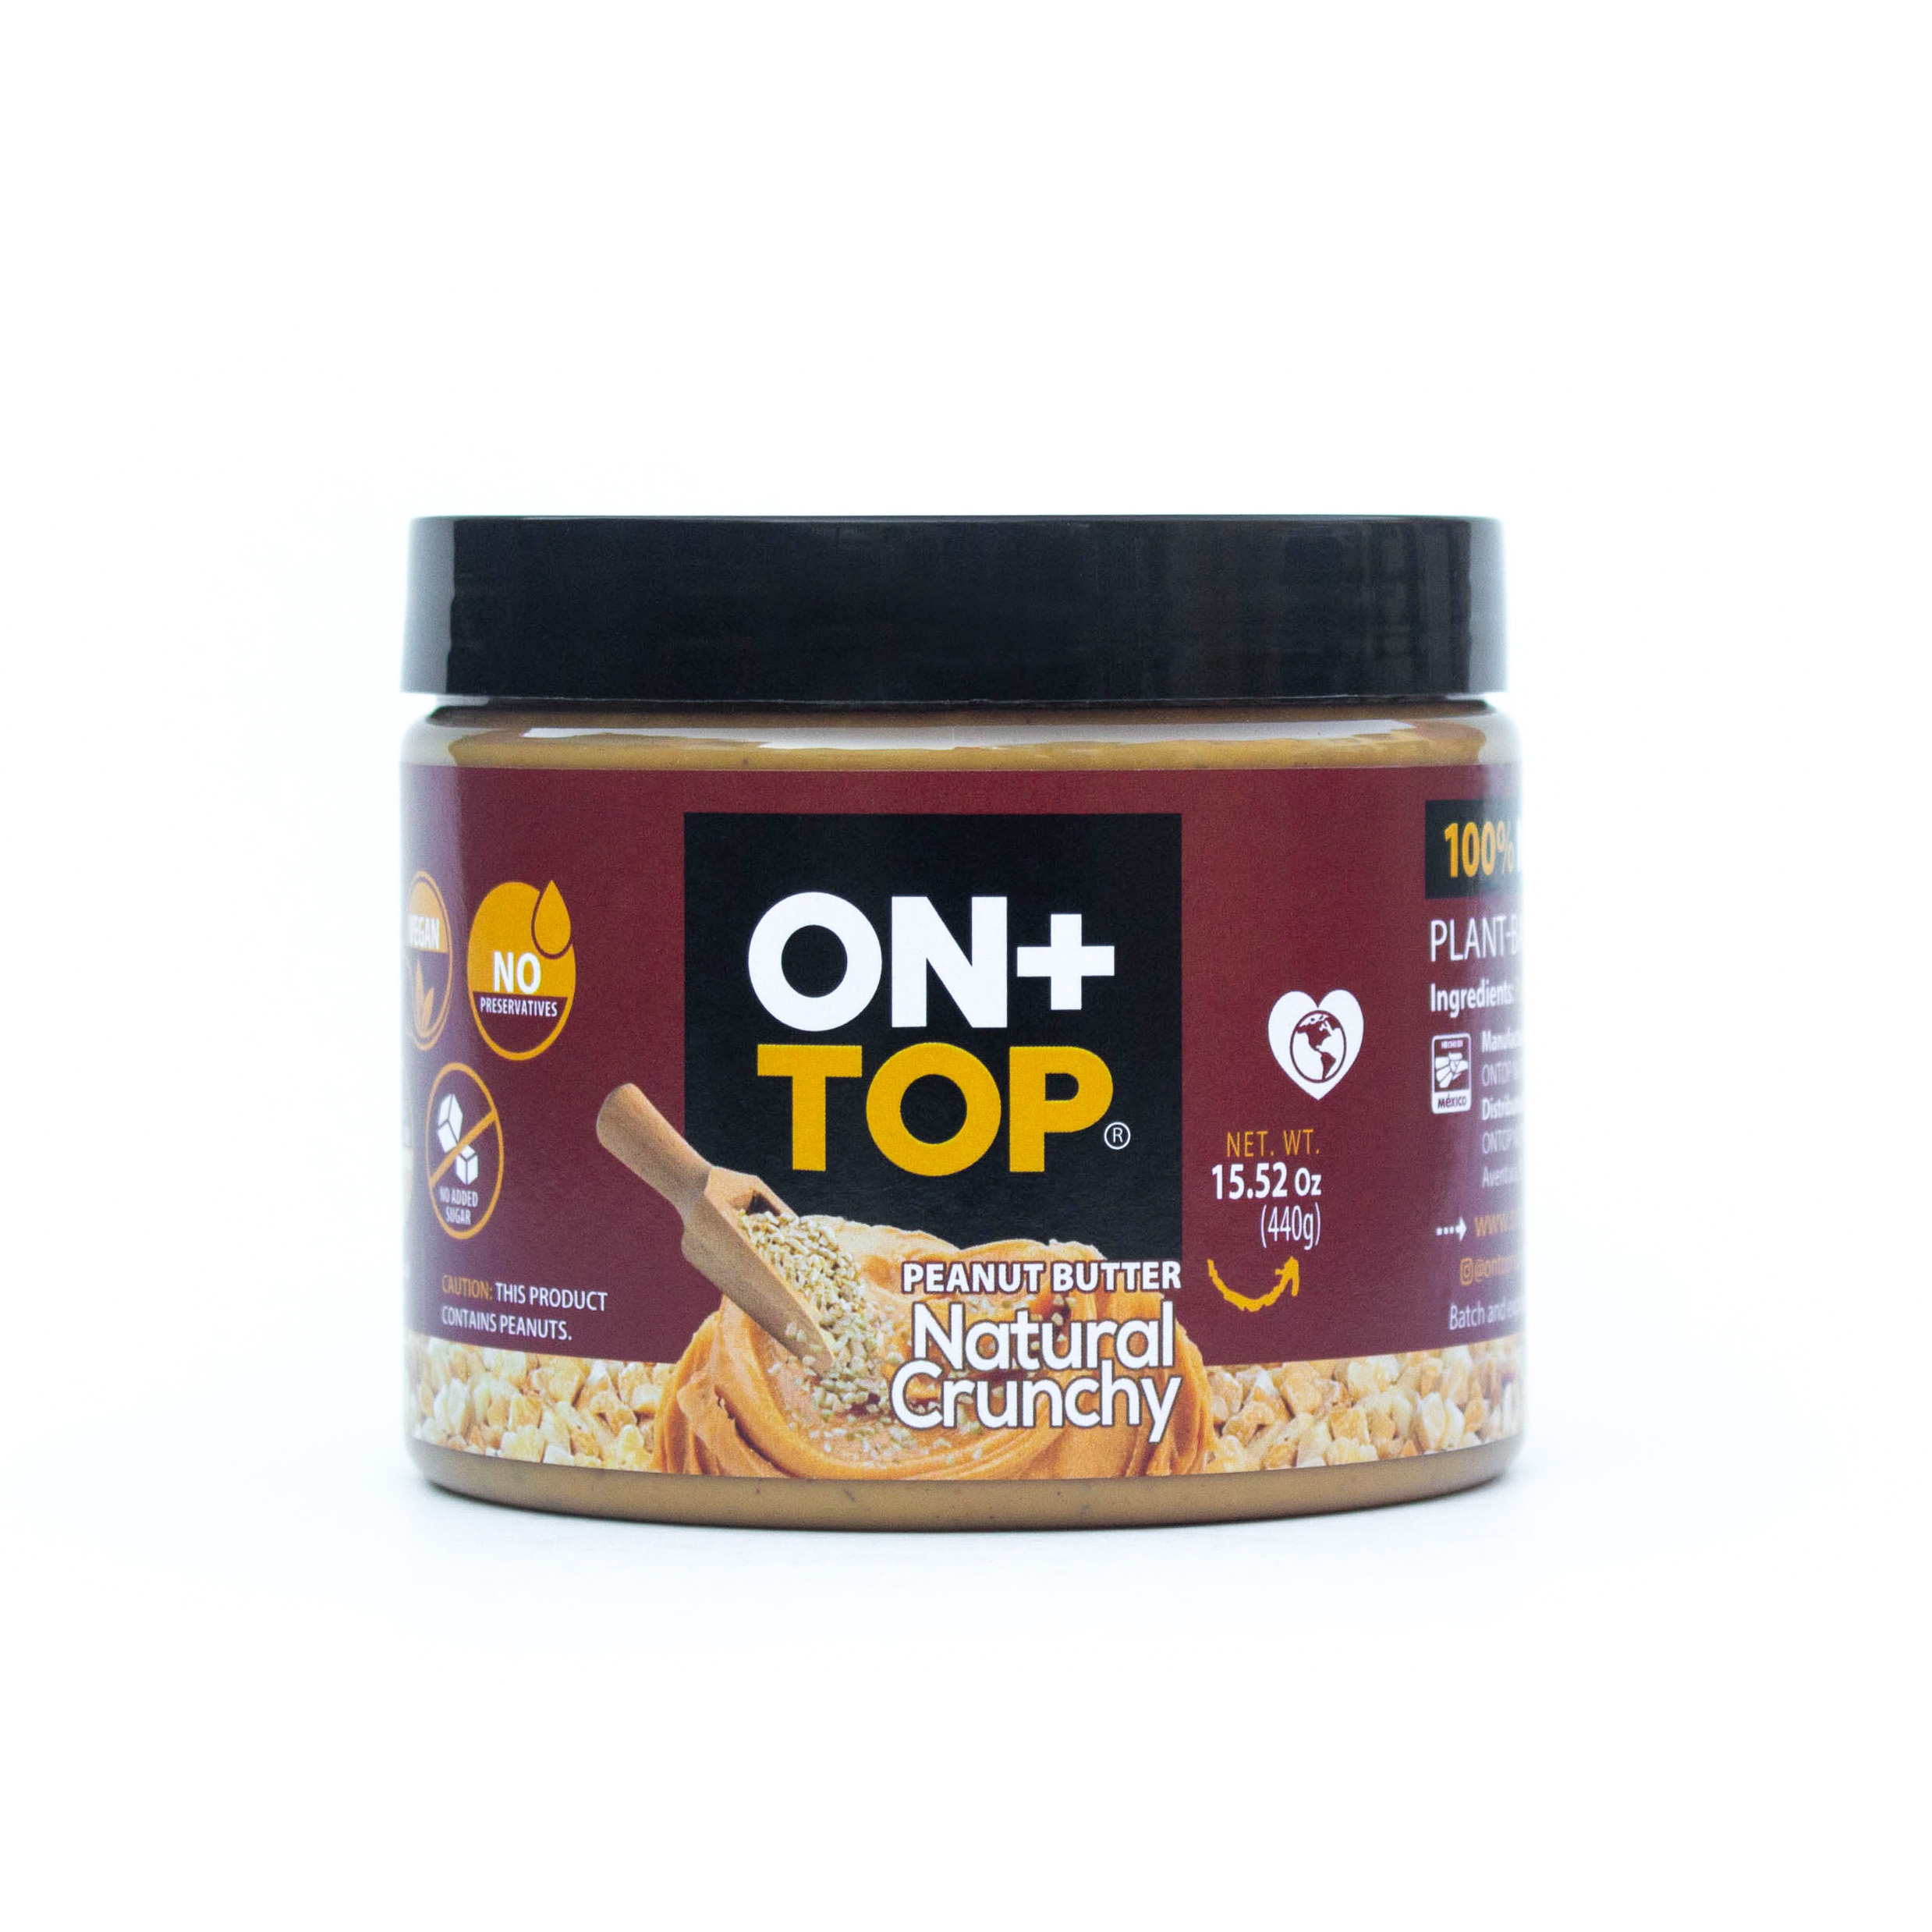 ON+TOP Peanut Butter Natural Crunchy  6 units per case 440 g